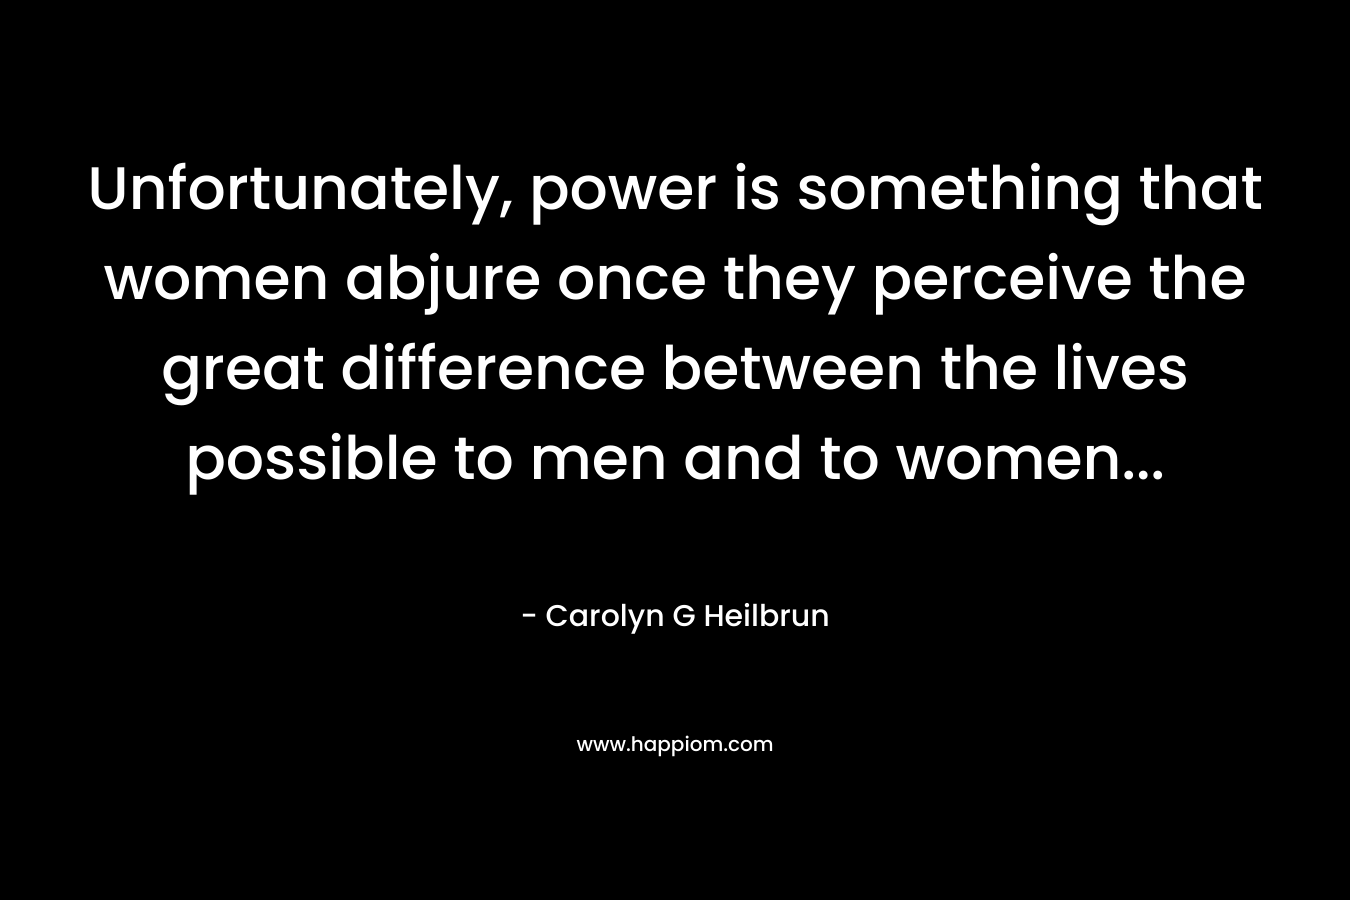 Unfortunately, power is something that women abjure once they perceive the great difference between the lives possible to men and to women...